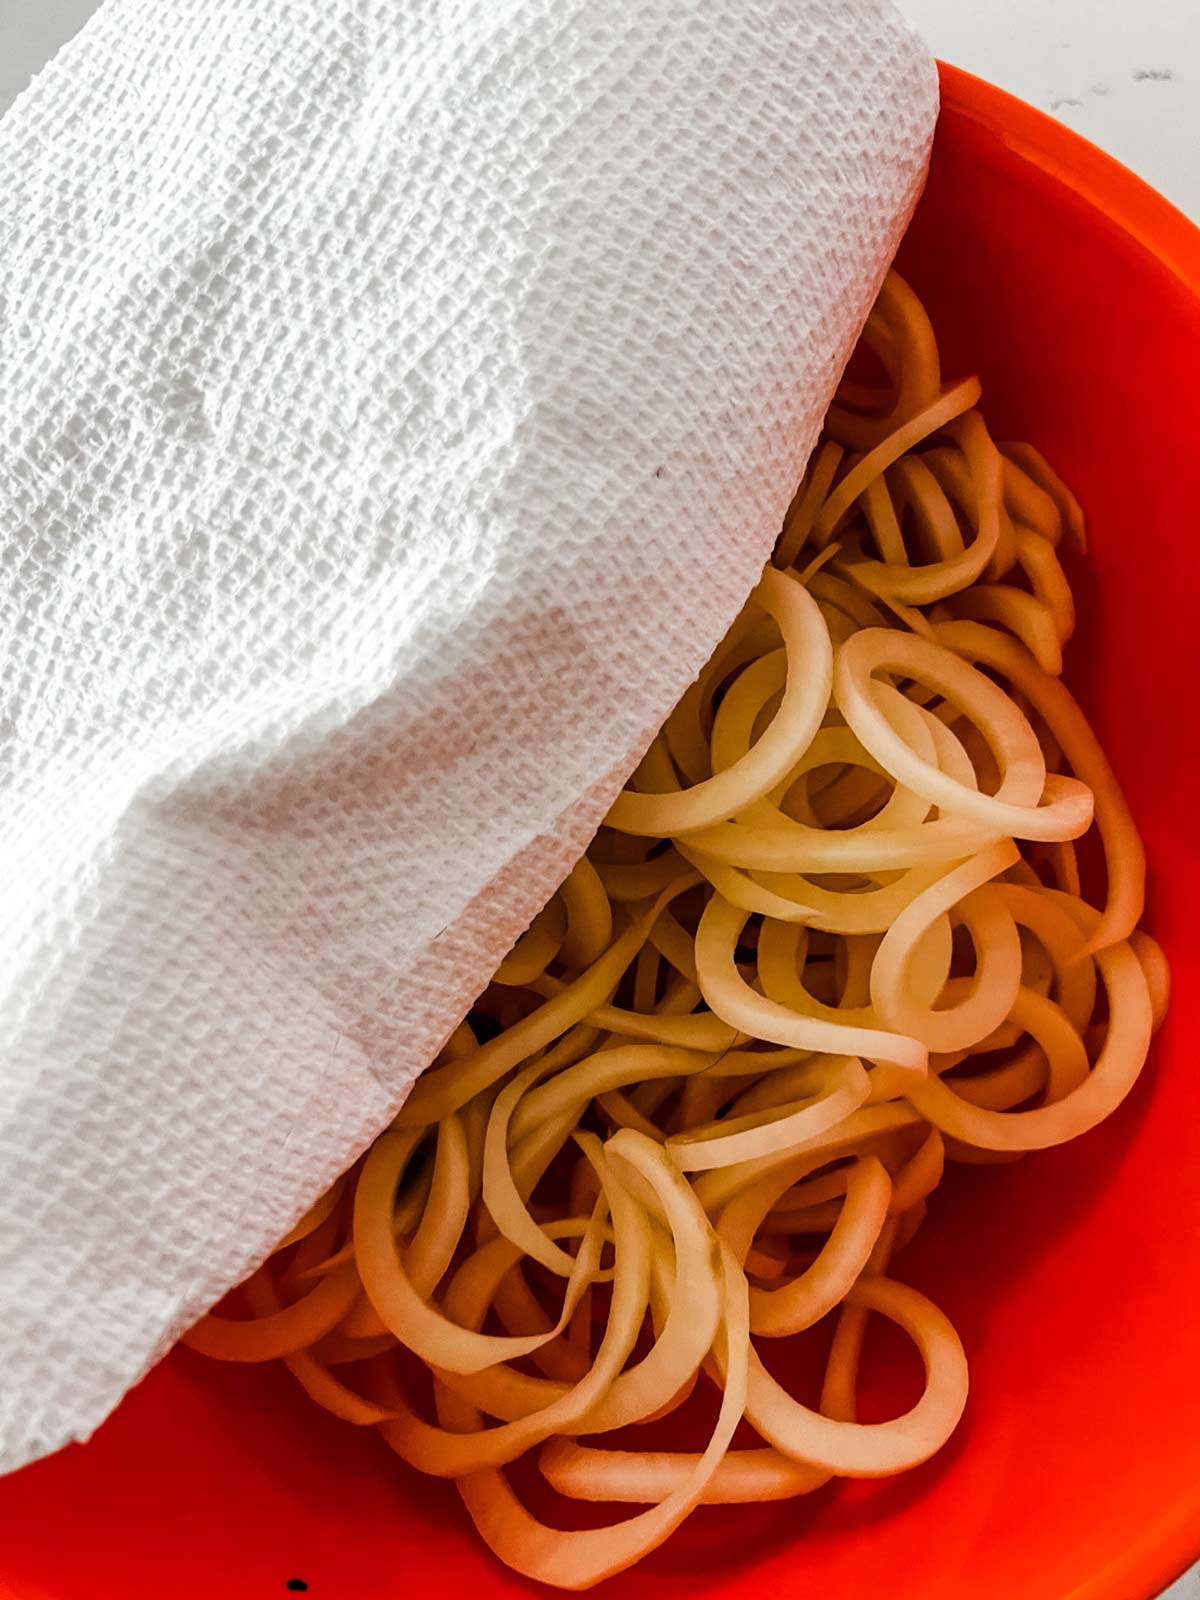 Spiralized potatoes that have been soaked being blotted dry with paper towels.